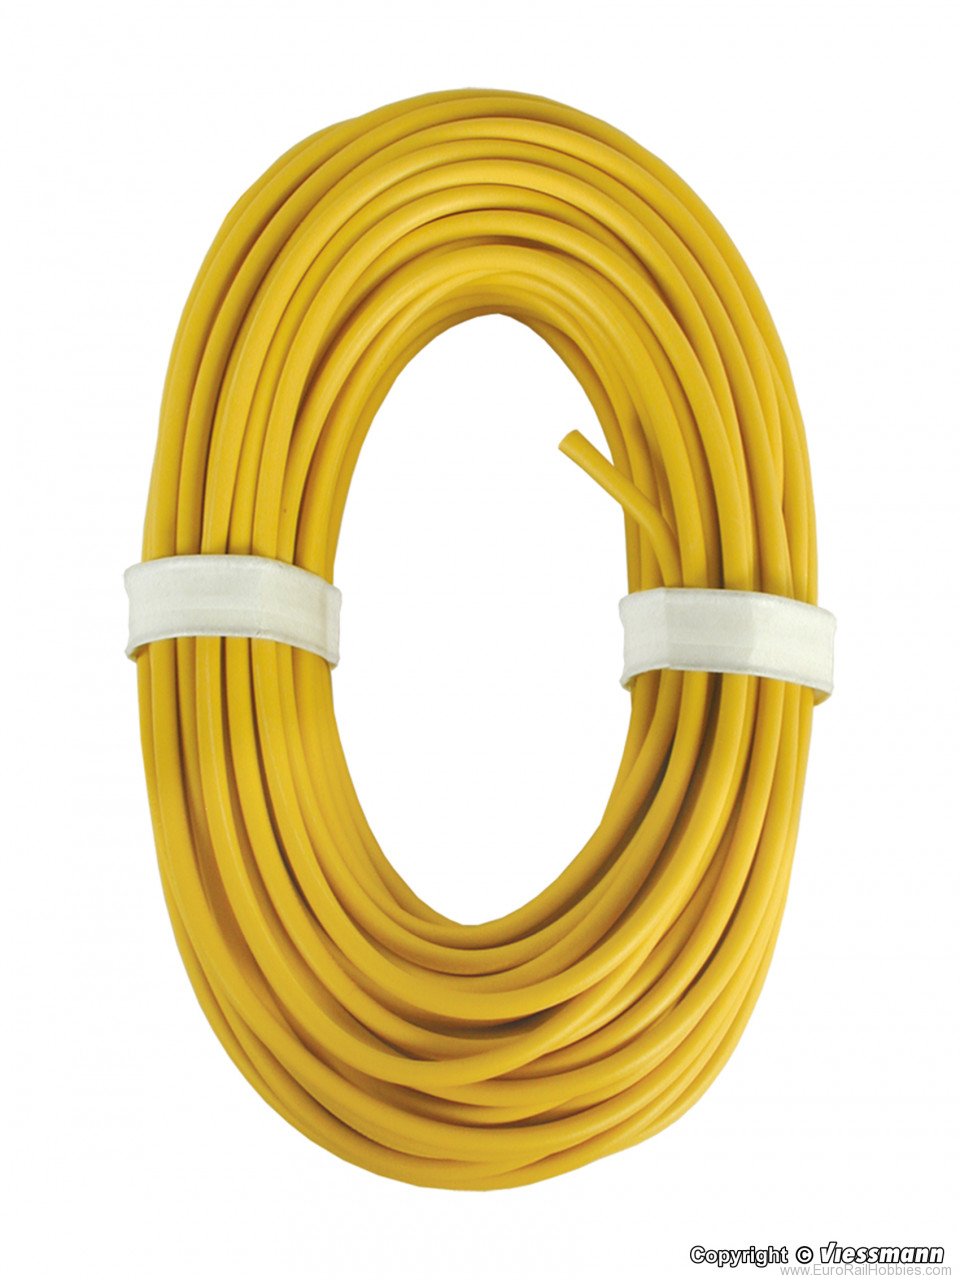 Viessmann 6897 High-current cable, 0,75 mm dia., yellow, 10 